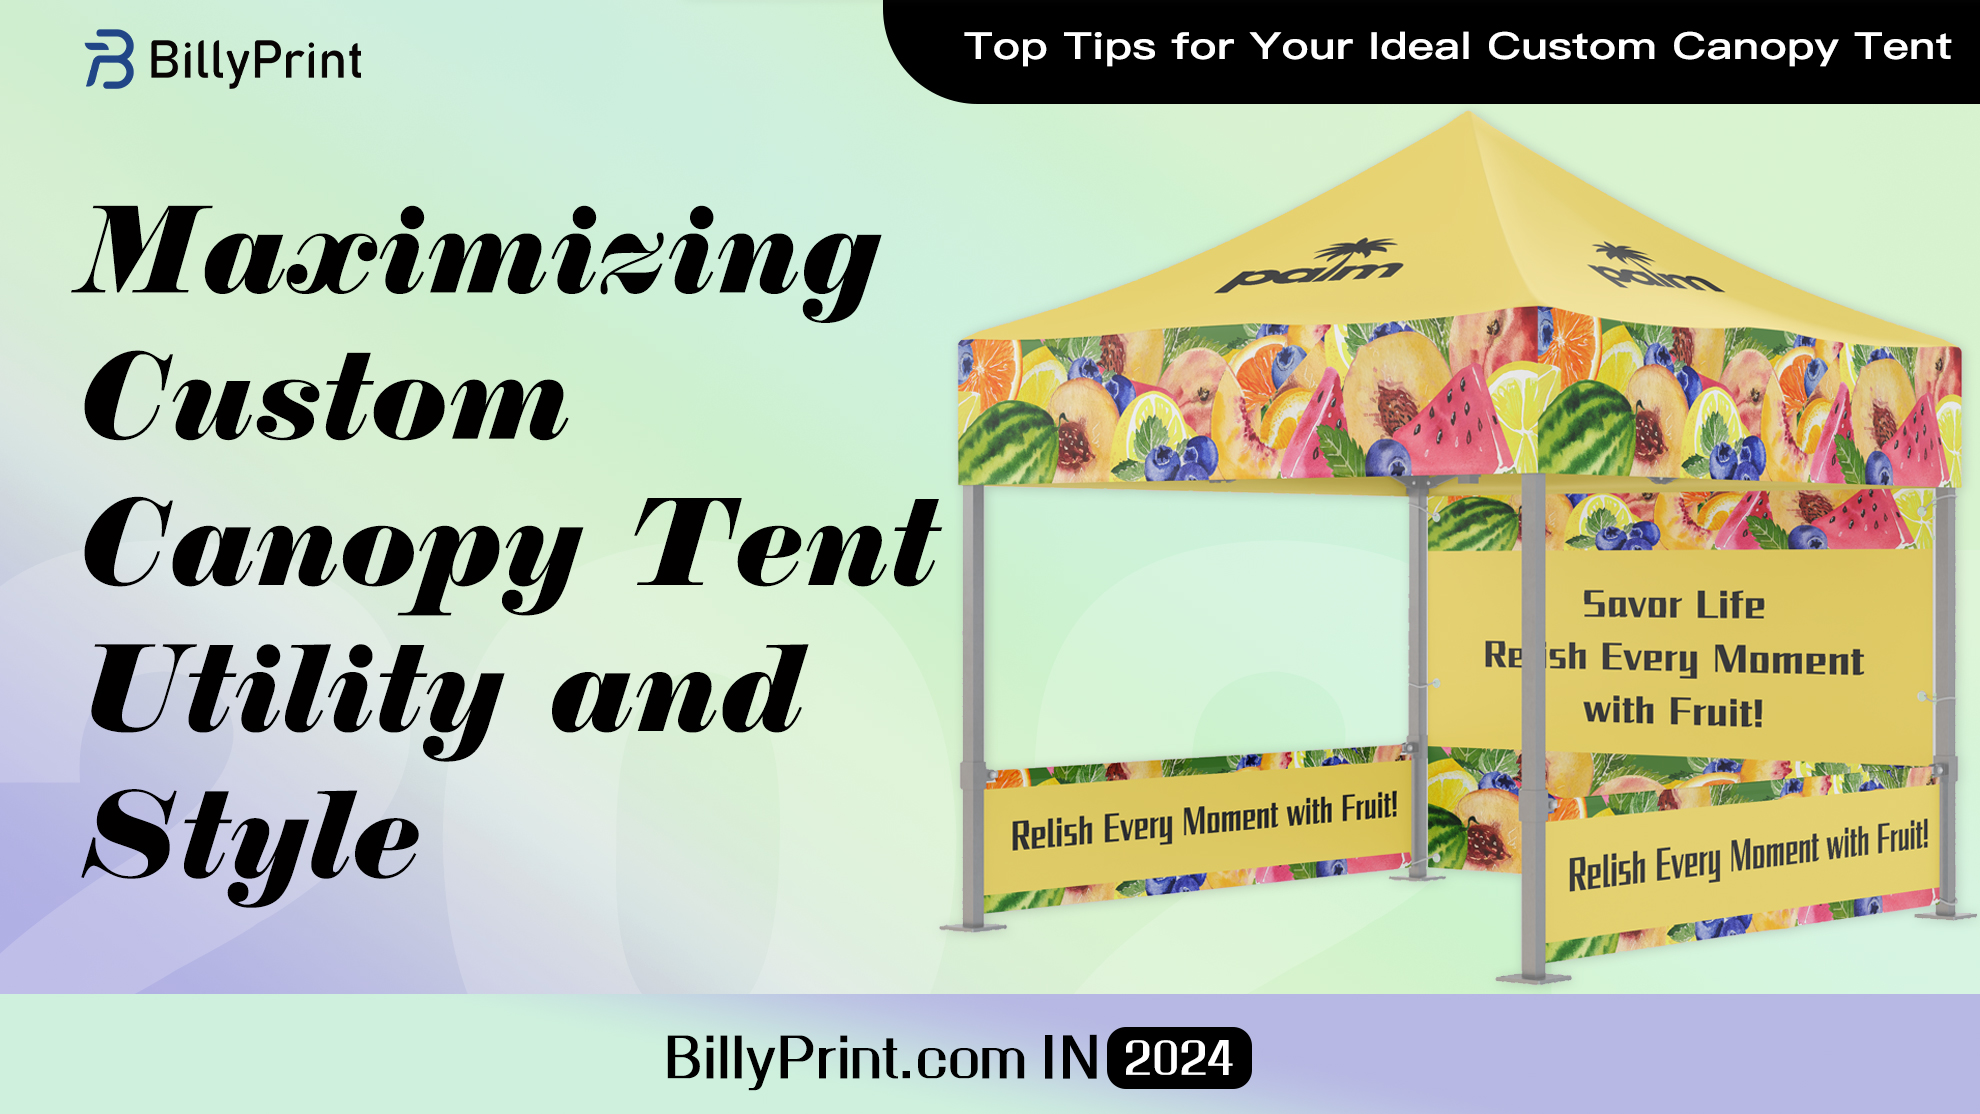 Custom Canopy Tents: 5 Key Tips for Making the Best Choice